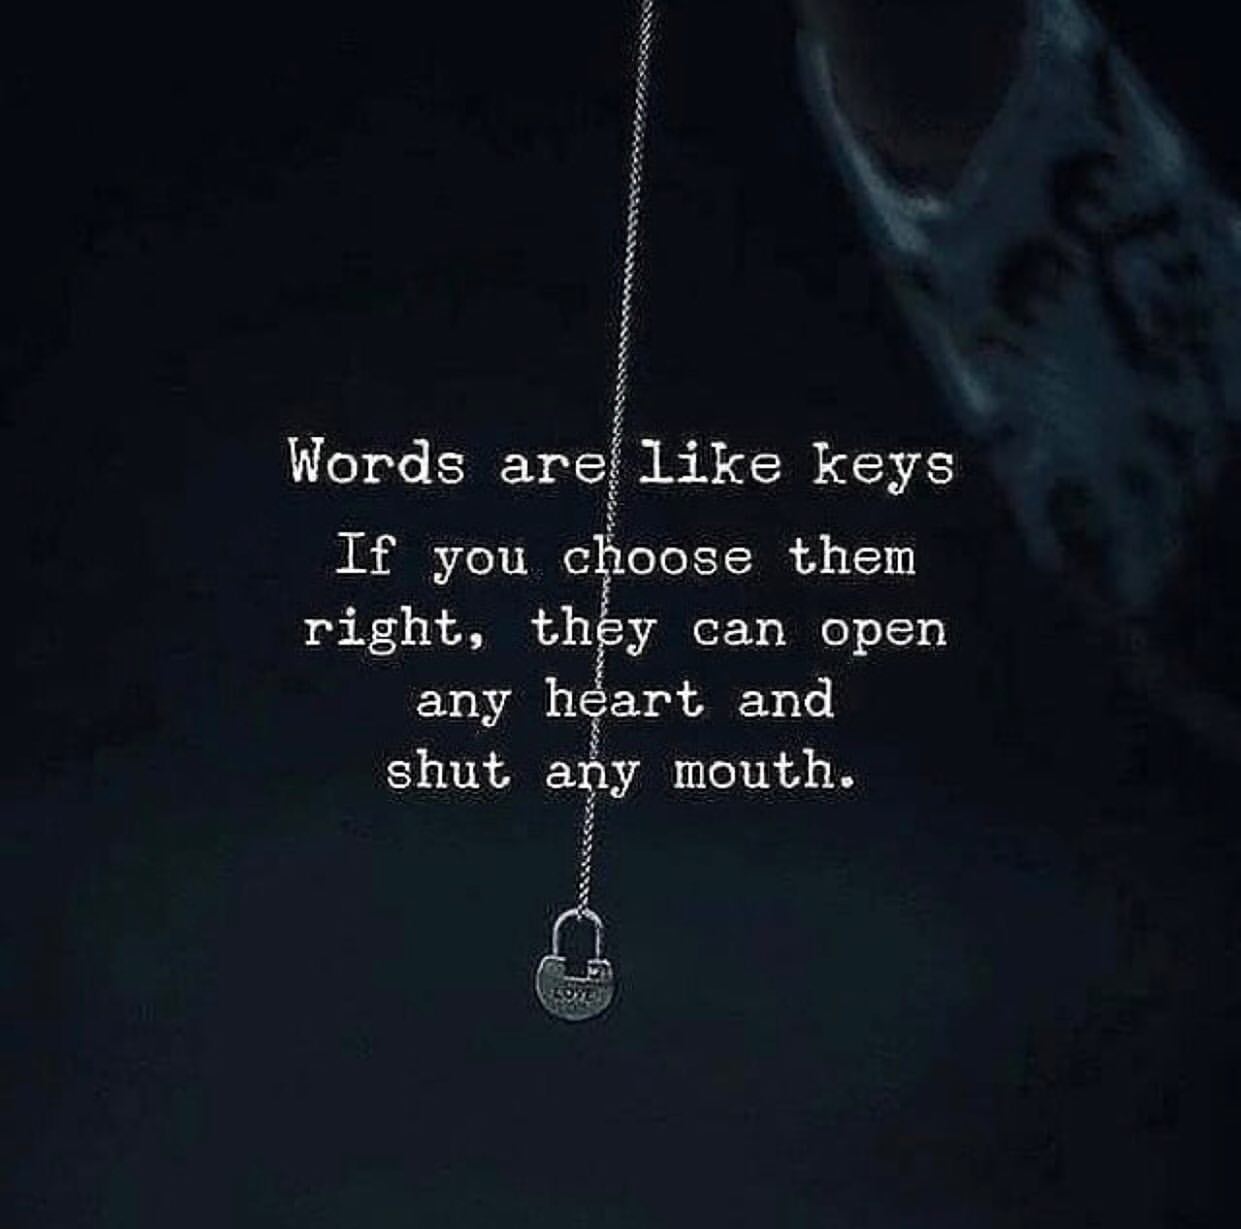 Words are like keys if you choose them right, they can open any heart and shut any mouth.